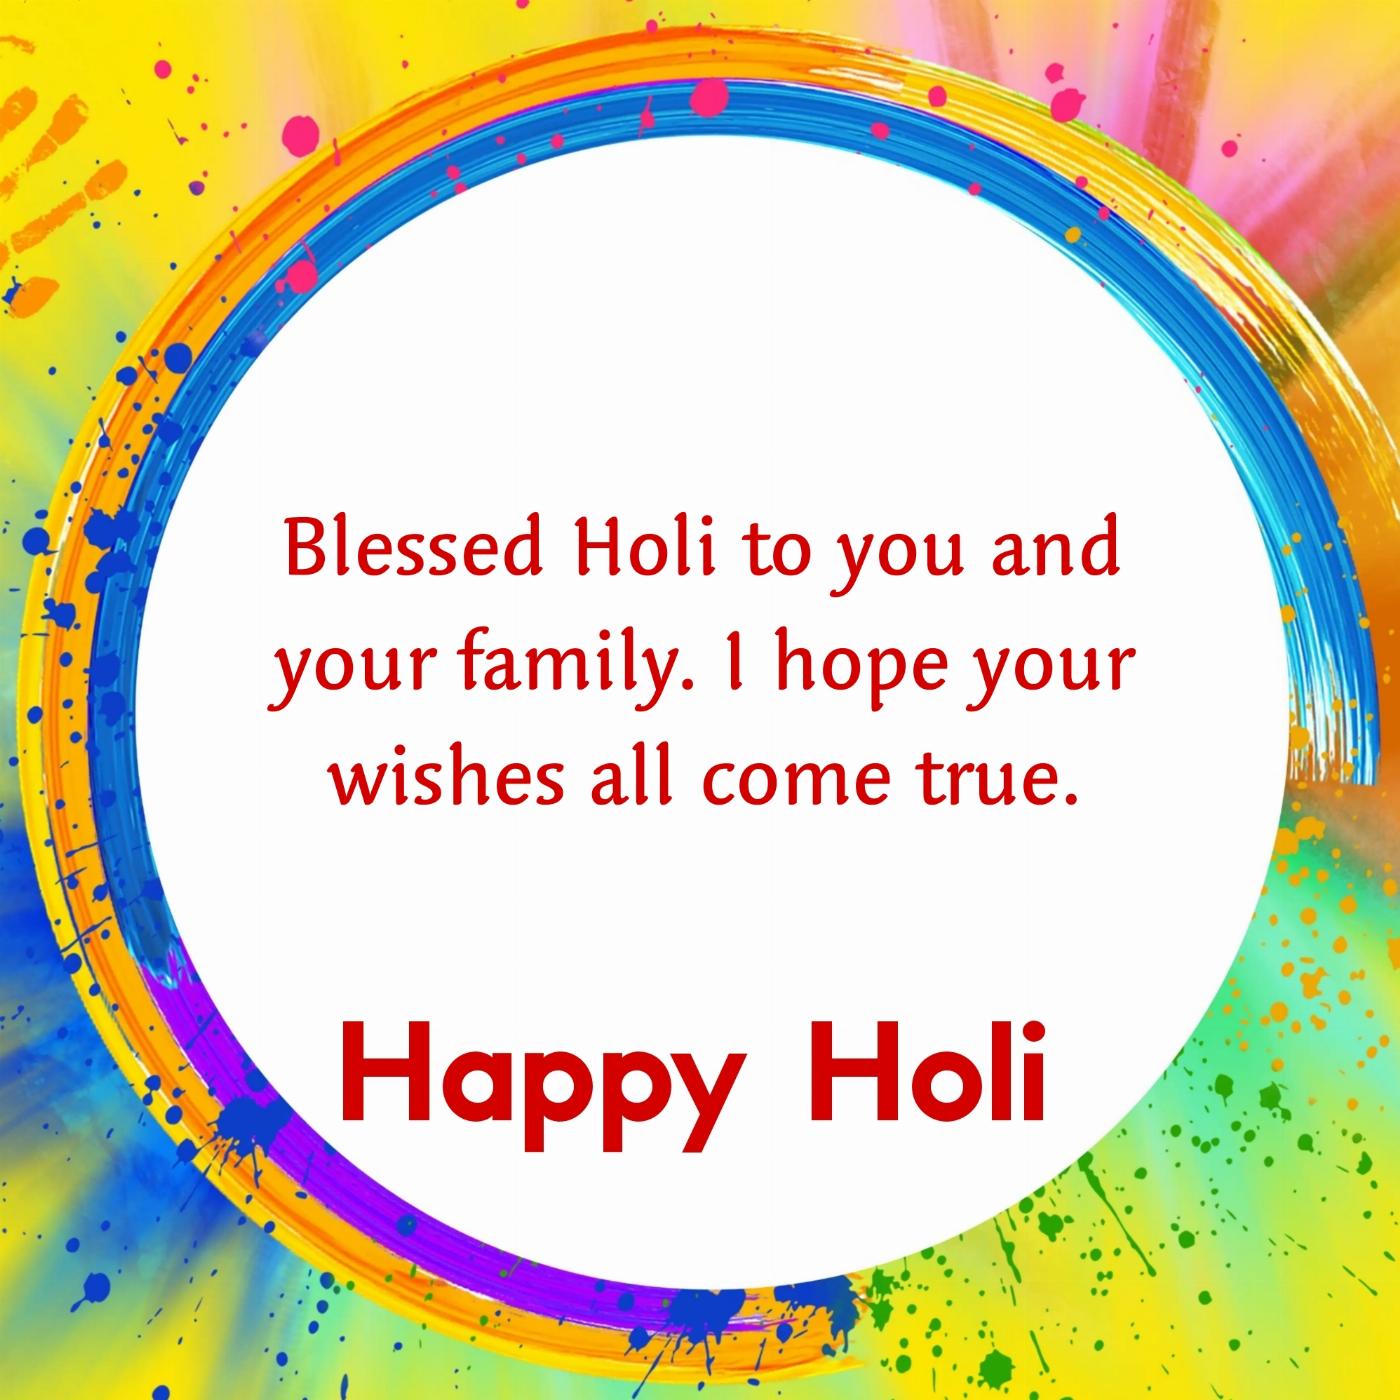 Blessed Holi to you and your family I hope your wishes all come true